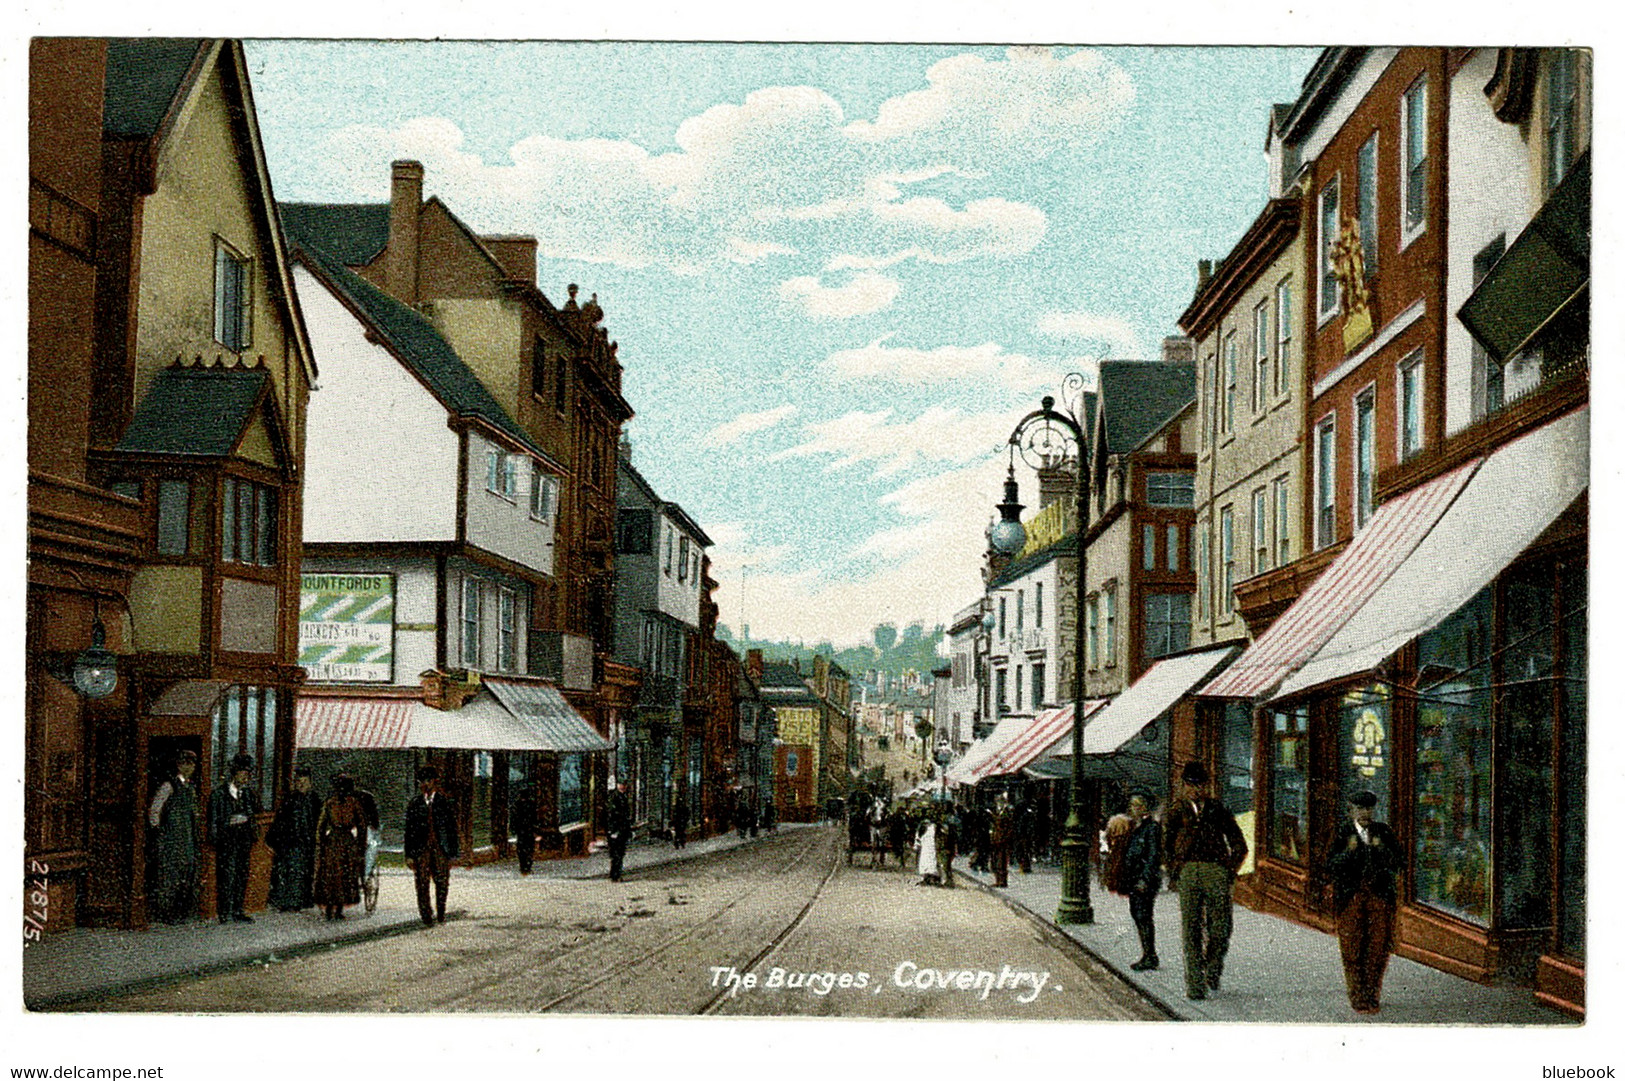 Ref 1528 - Early Hartmann Postcard - The Burges Coventry - Warwickshire - Coventry